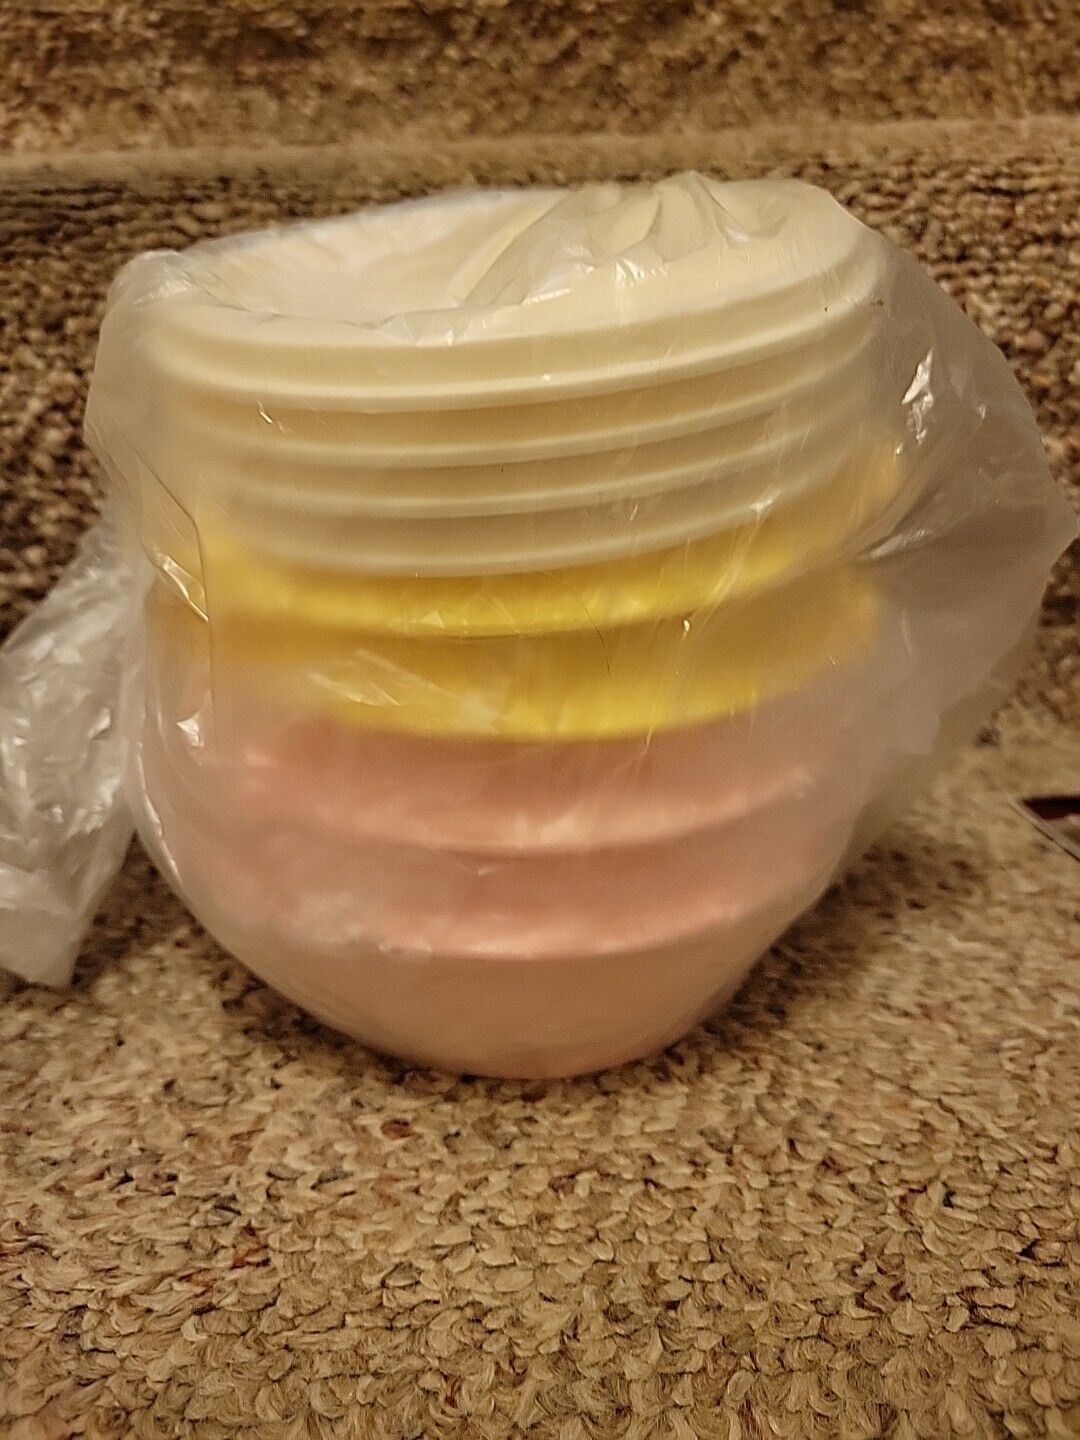 Tupperware Servalier Bowls 10 oz. Set of 2-Pastel Yellow, 2-Candy PINK 